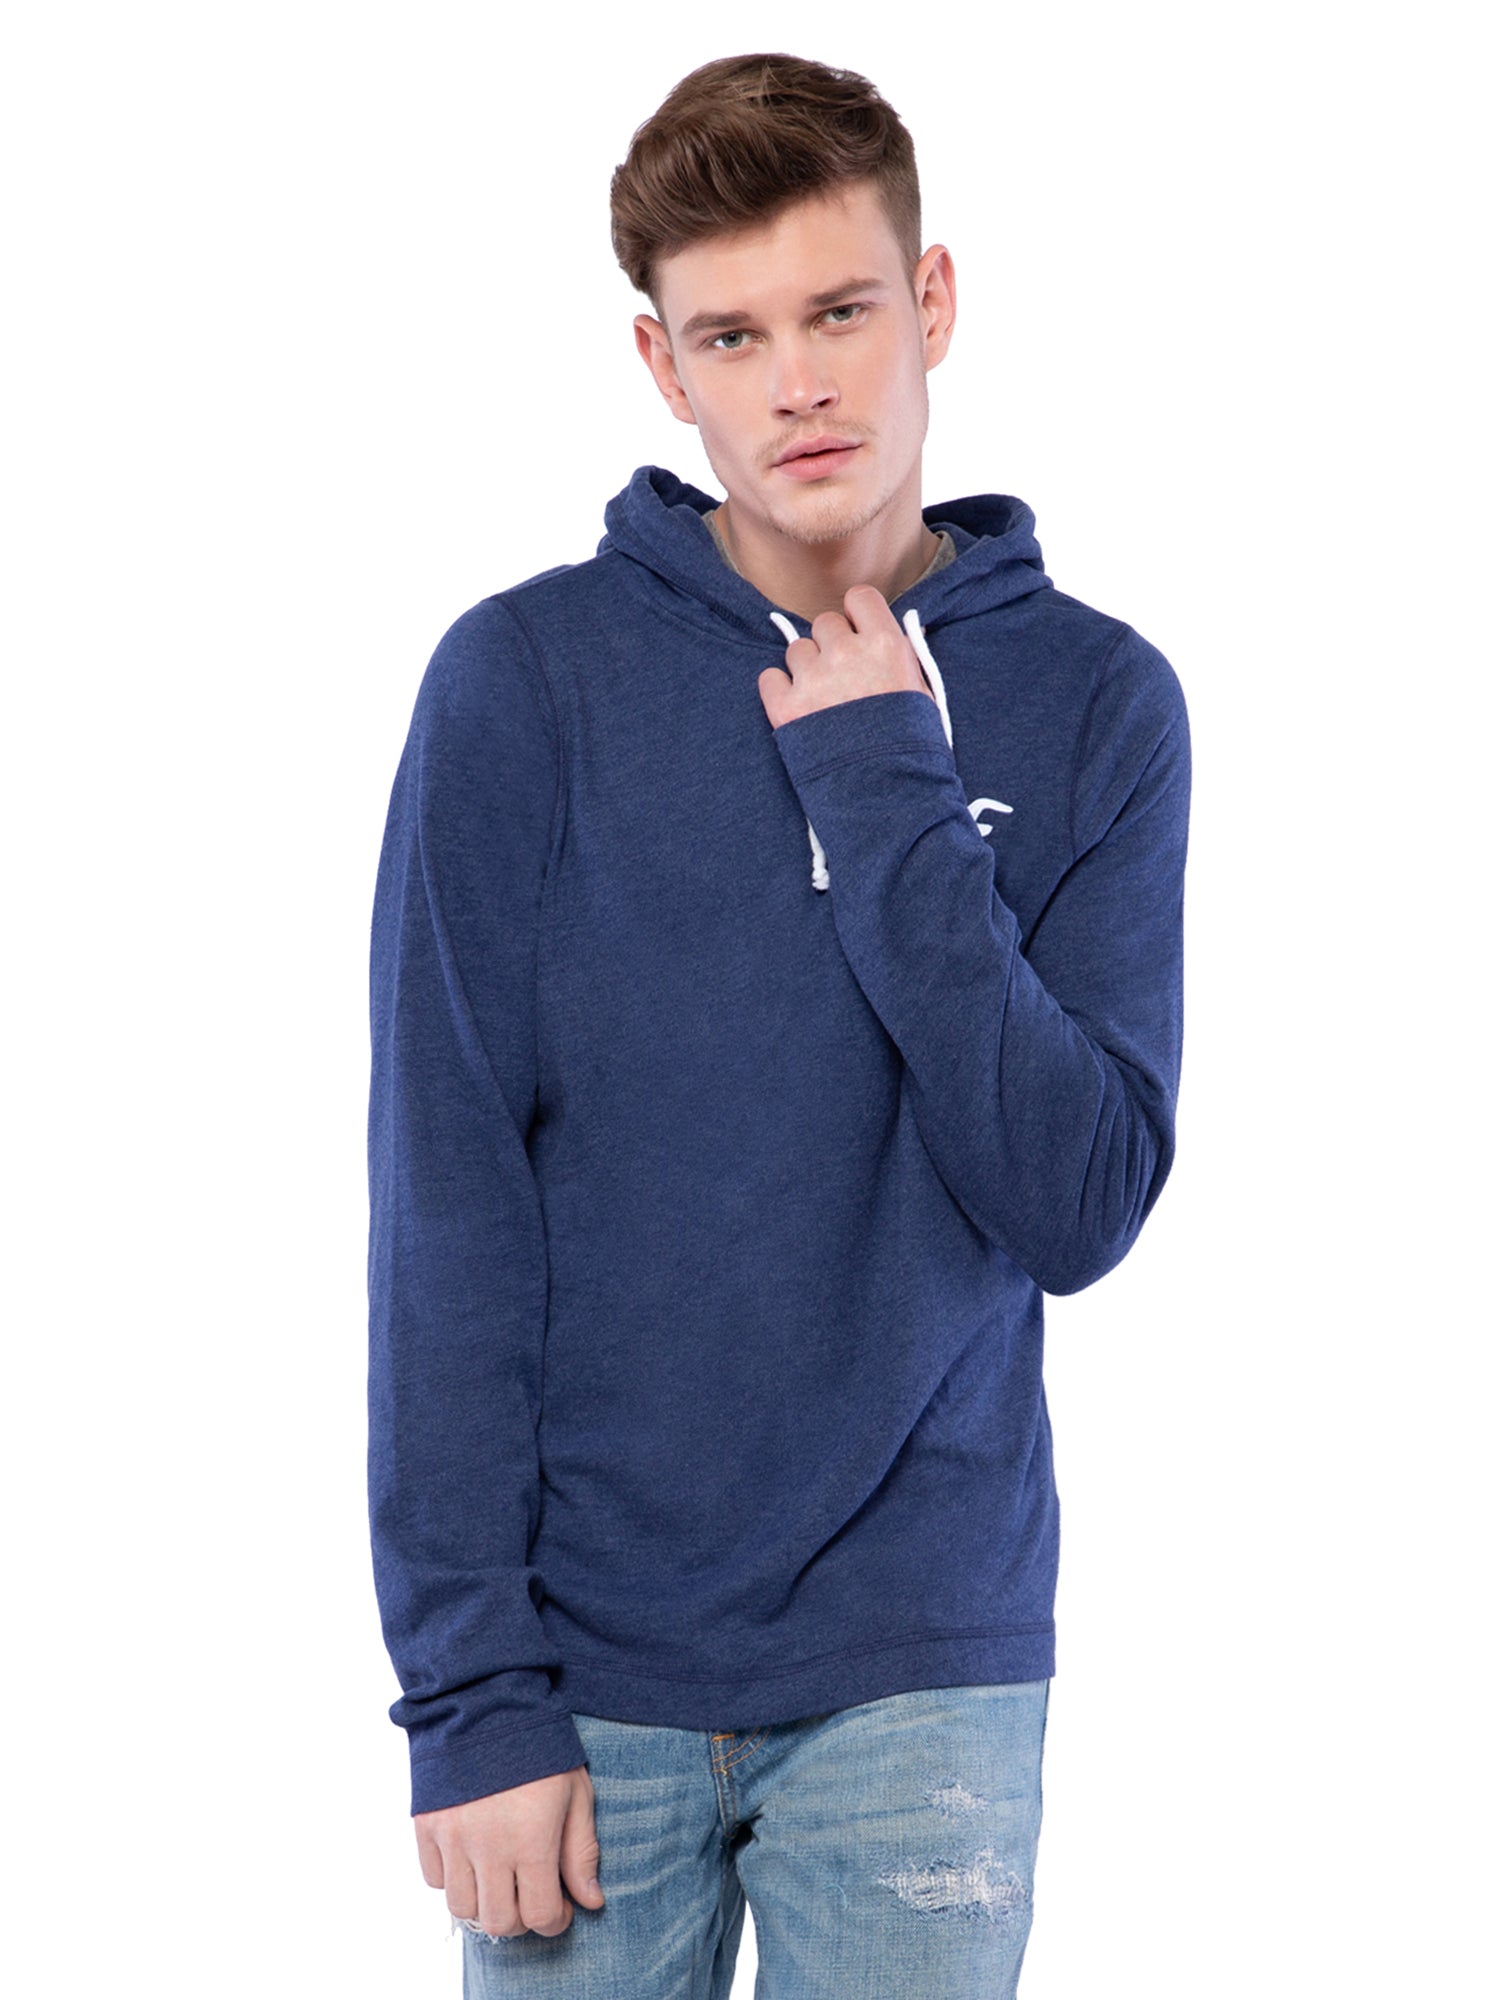 cheap hollister hoodies for sale